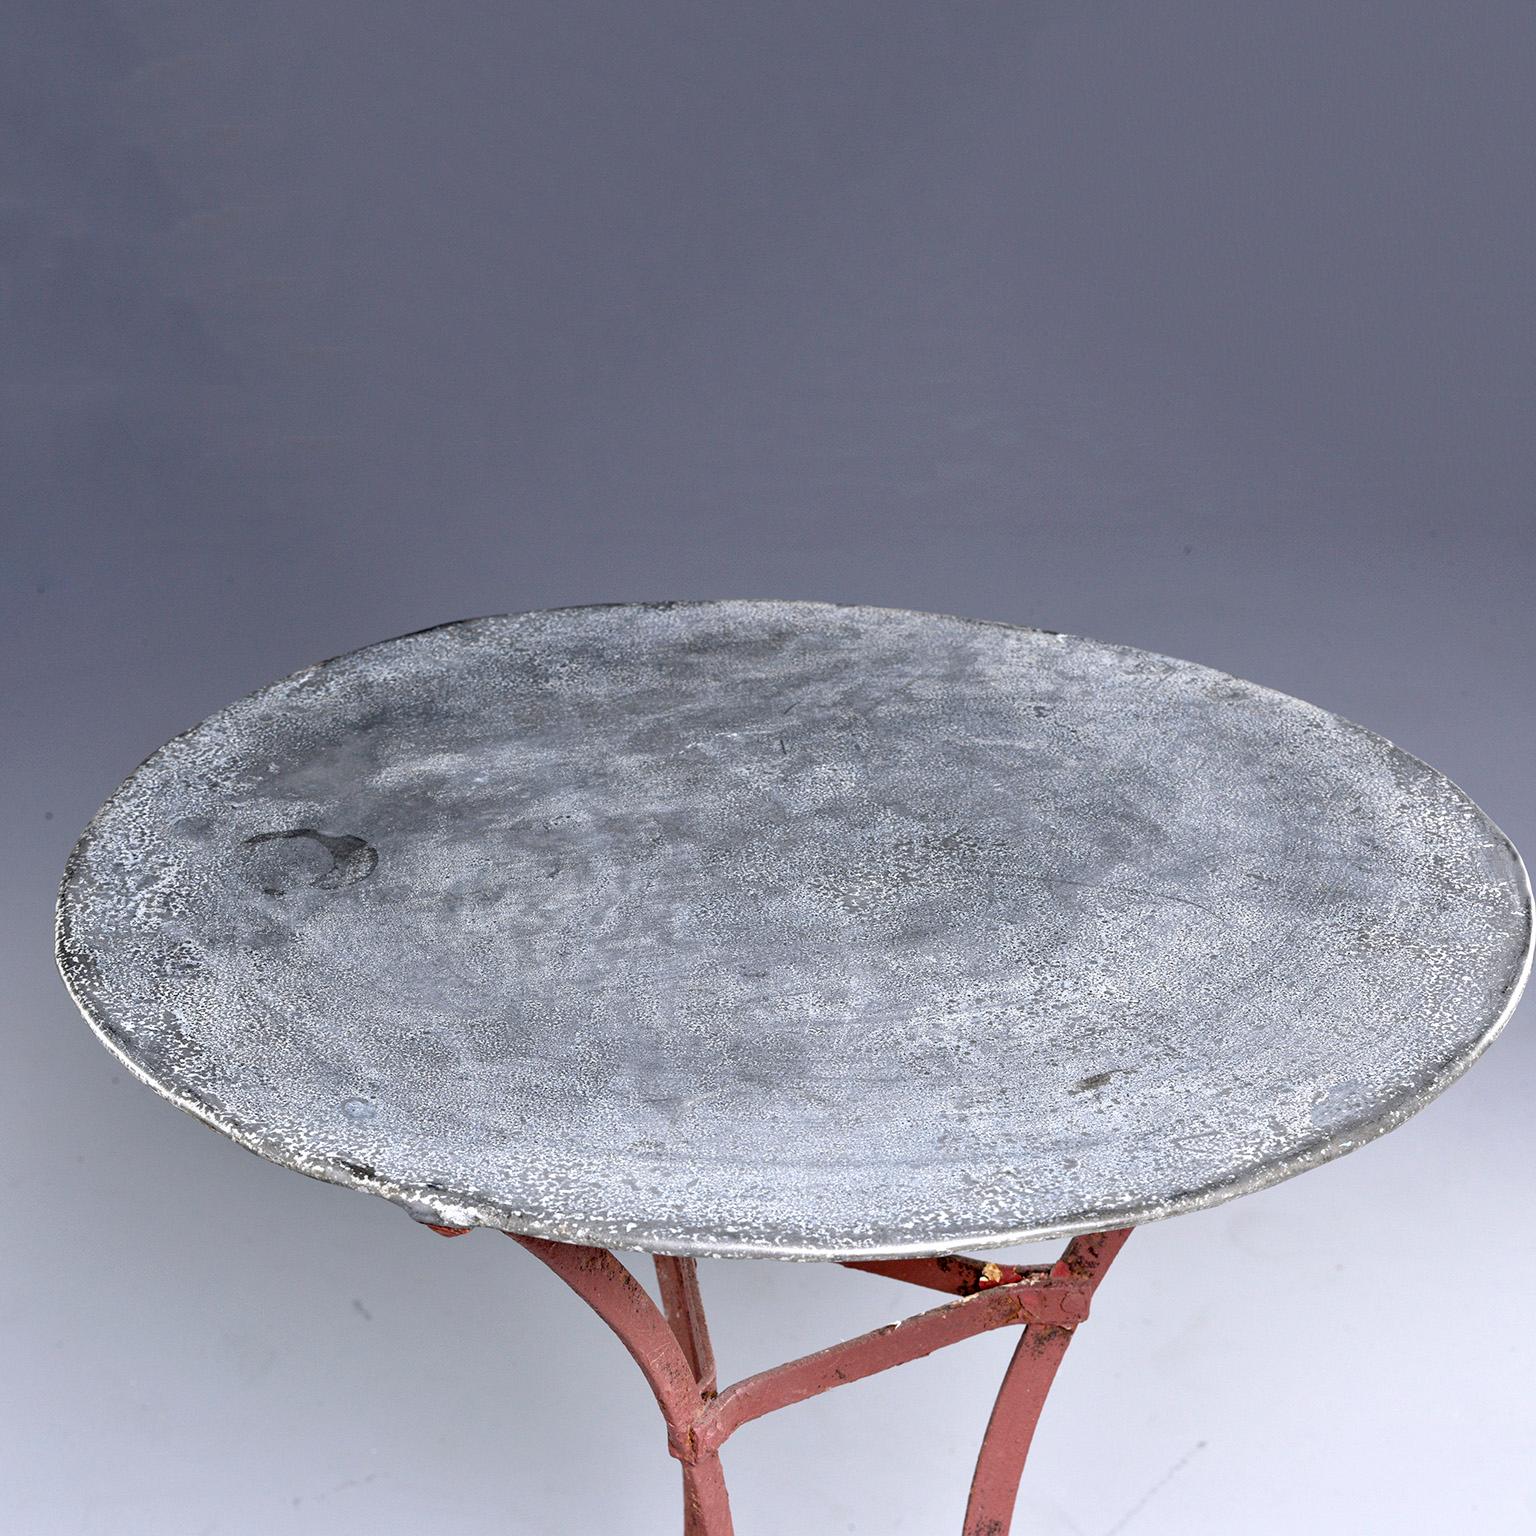 Small French bistro table has a round zinc top with red painted iron base, mid-20th century. Very good vintage condition with original paint and patina, circa 1950s.
  